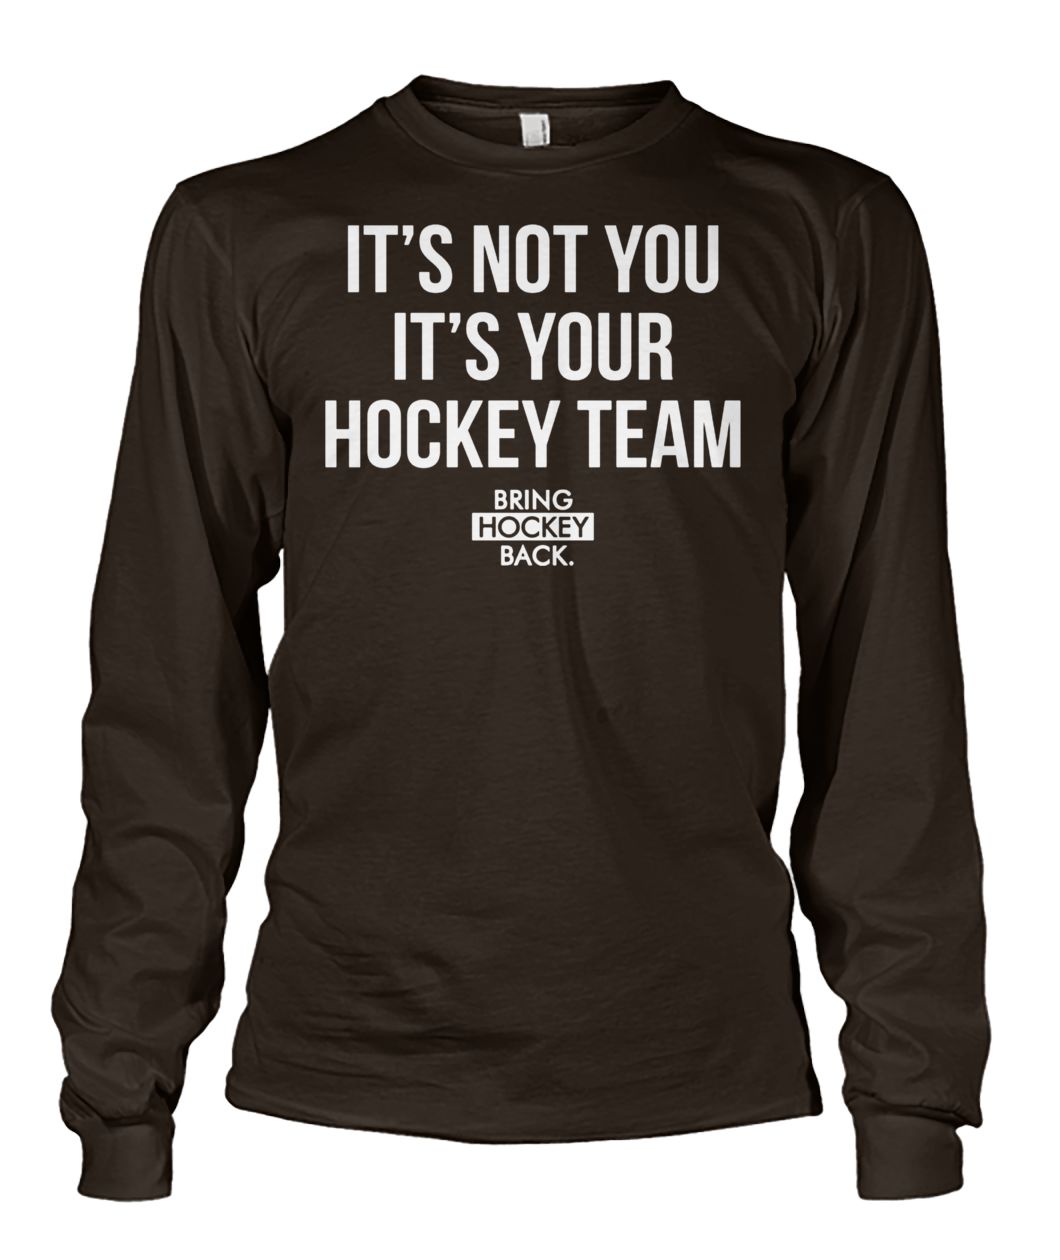 Marvel it's not you it's your hockey team unisex long sleeve